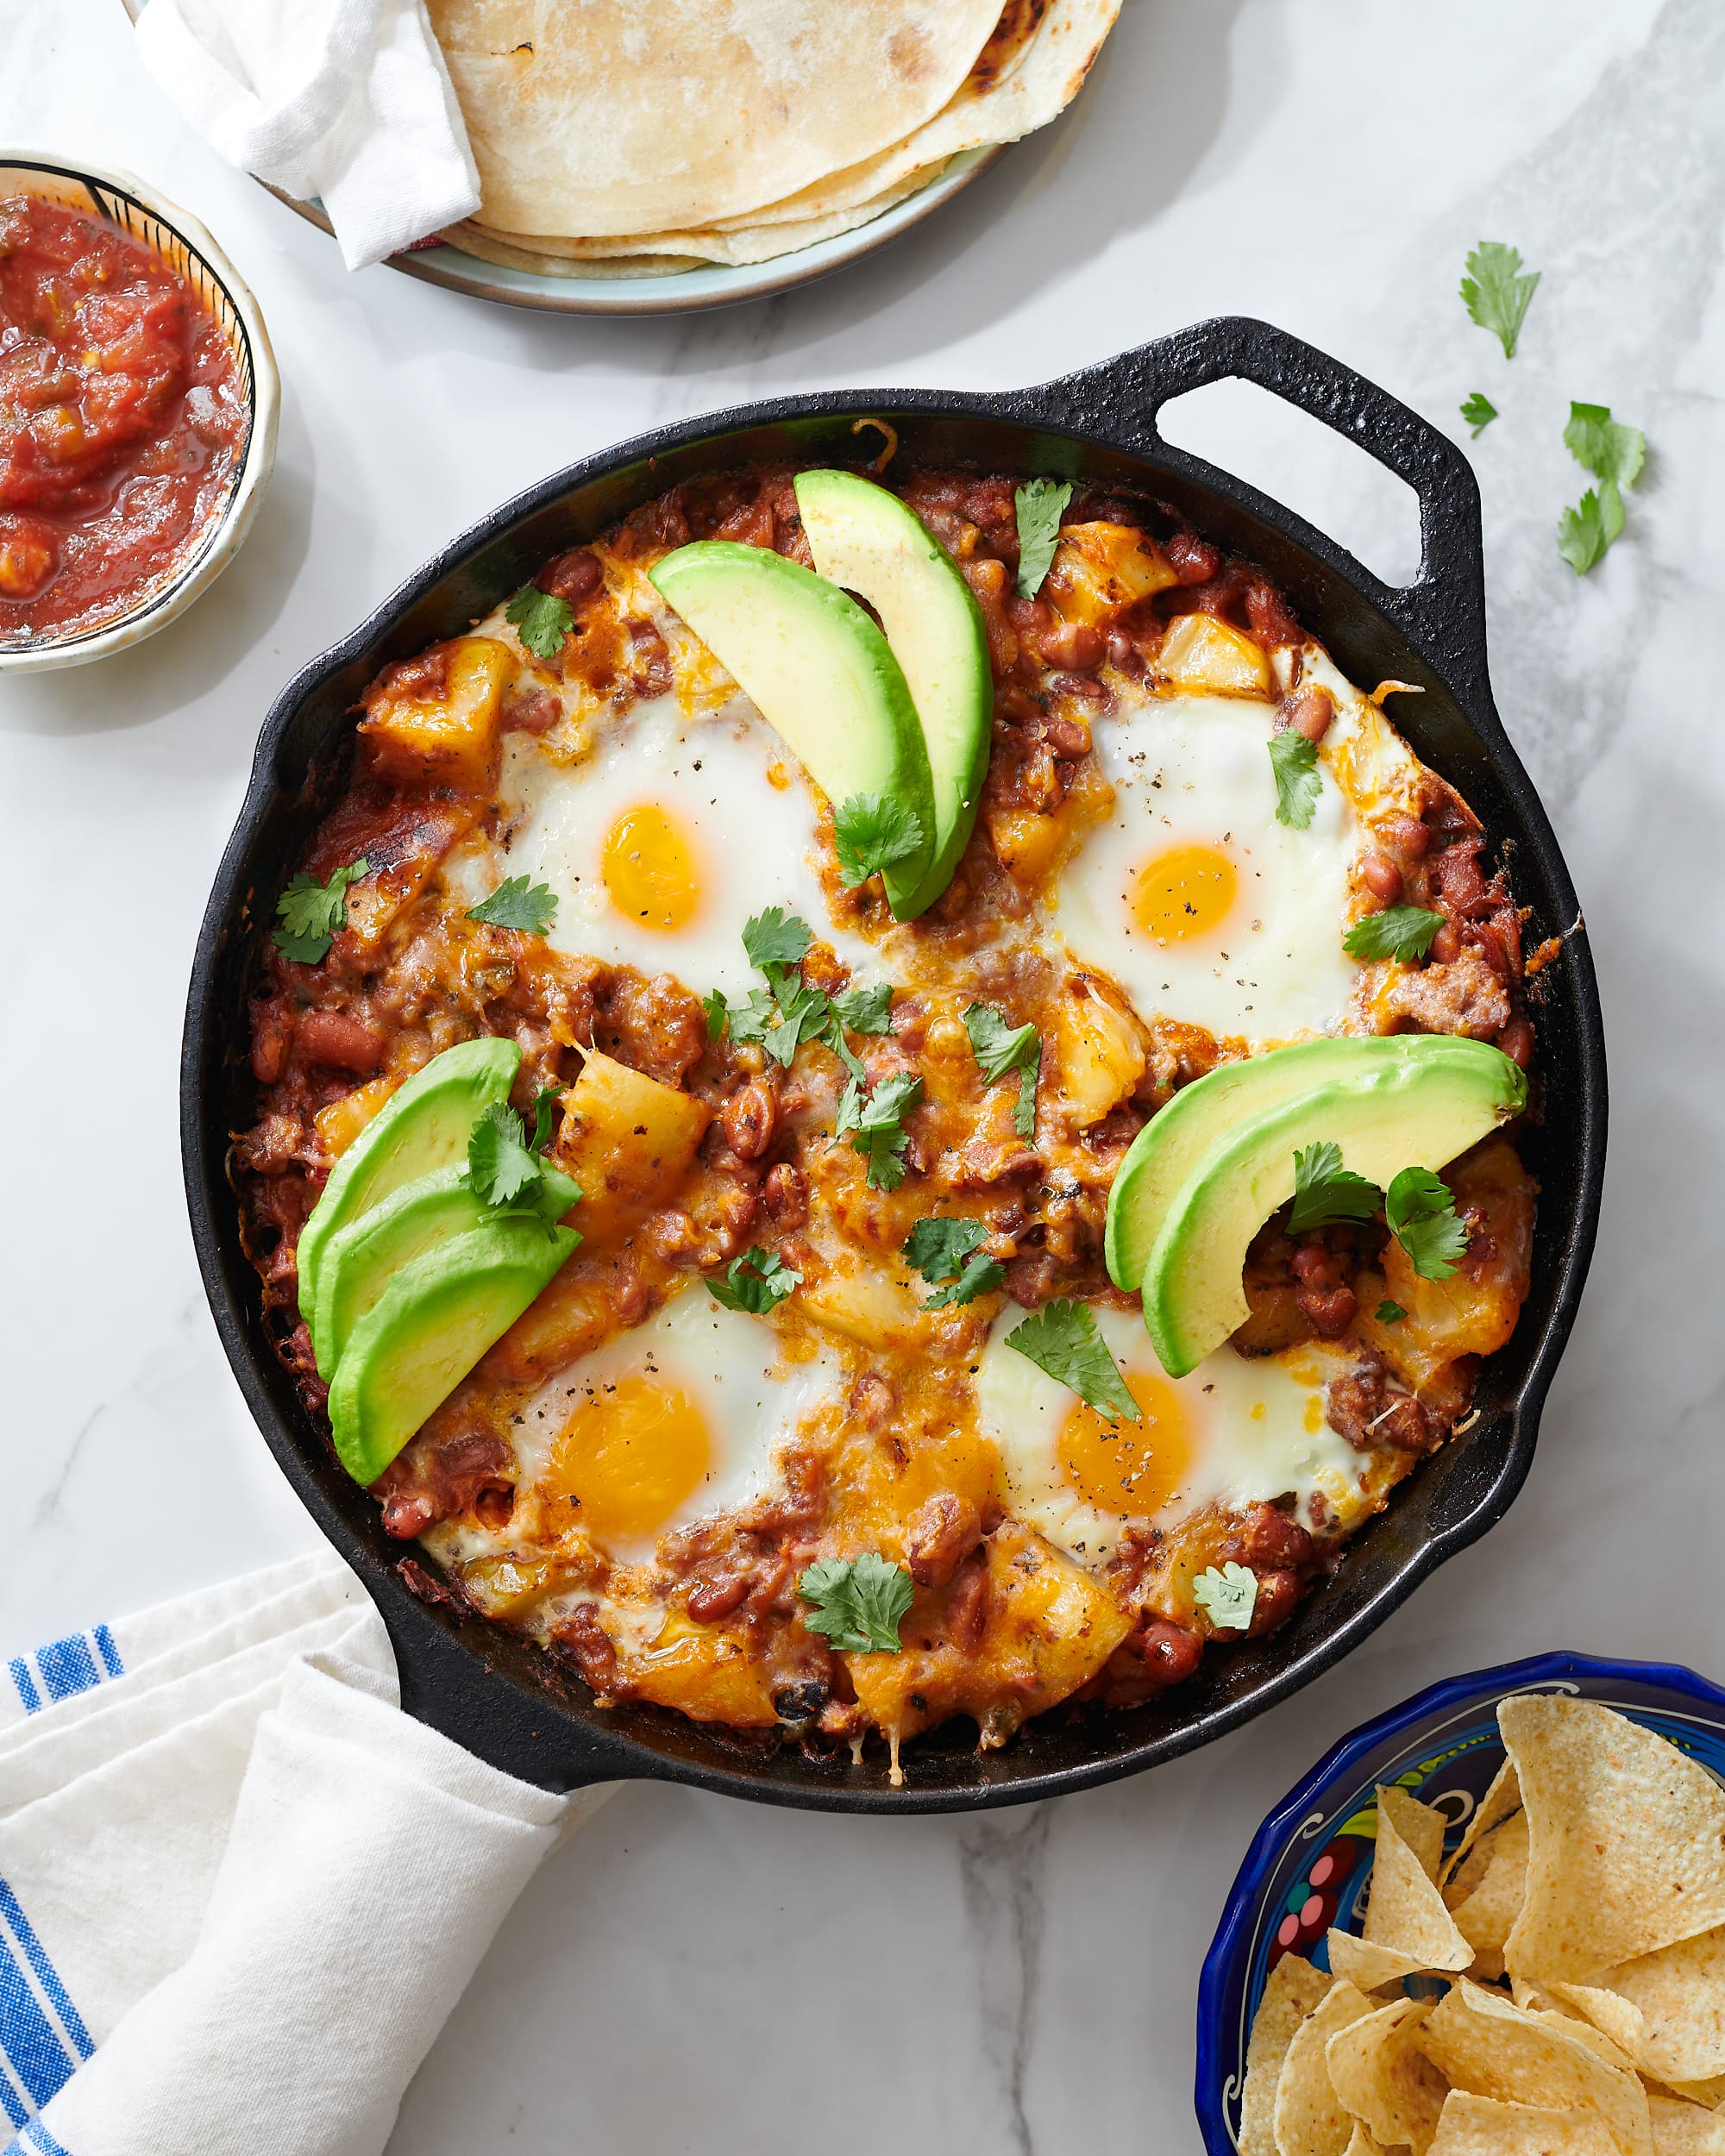 https://cdn.apartmenttherapy.info/image/upload/v1608304778/k/Photo/Recipes/2020-12-most-wanted-the-best-loaded-breakfast-skillet/k-photo-2020-12-breakfast-skillet-2.jpg